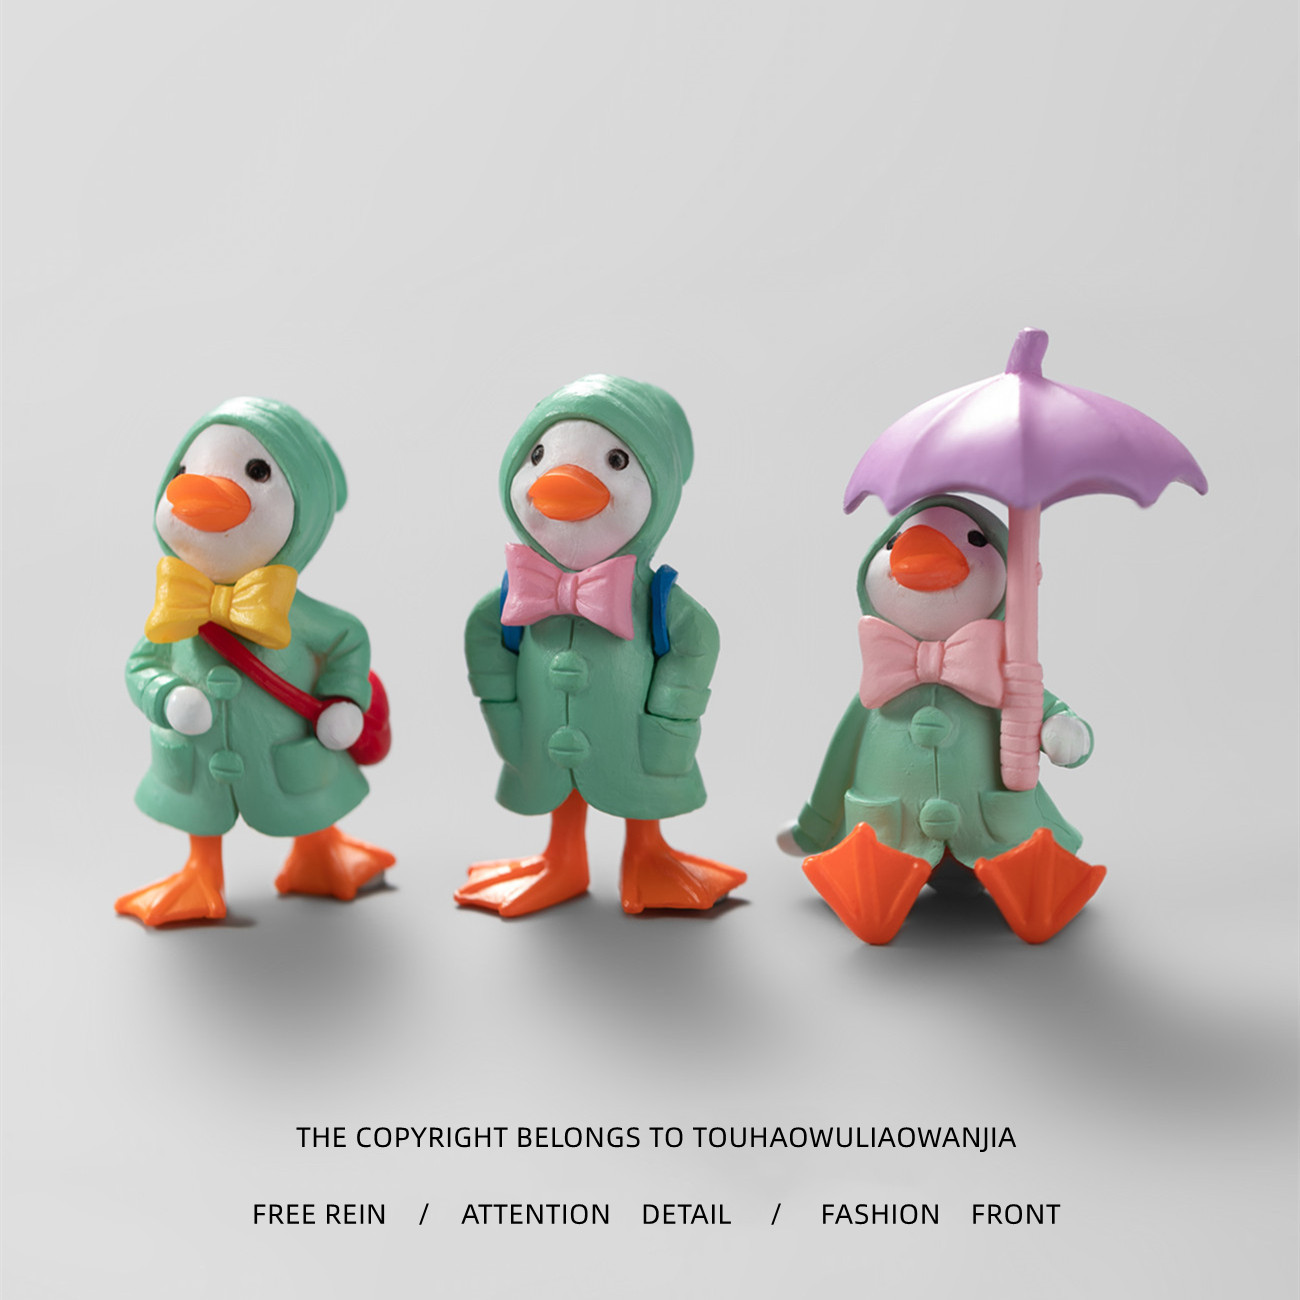 images 2:Bored to give Ta a set of green raincoat ducks, cartoons are cute, creative little pendulum gifts